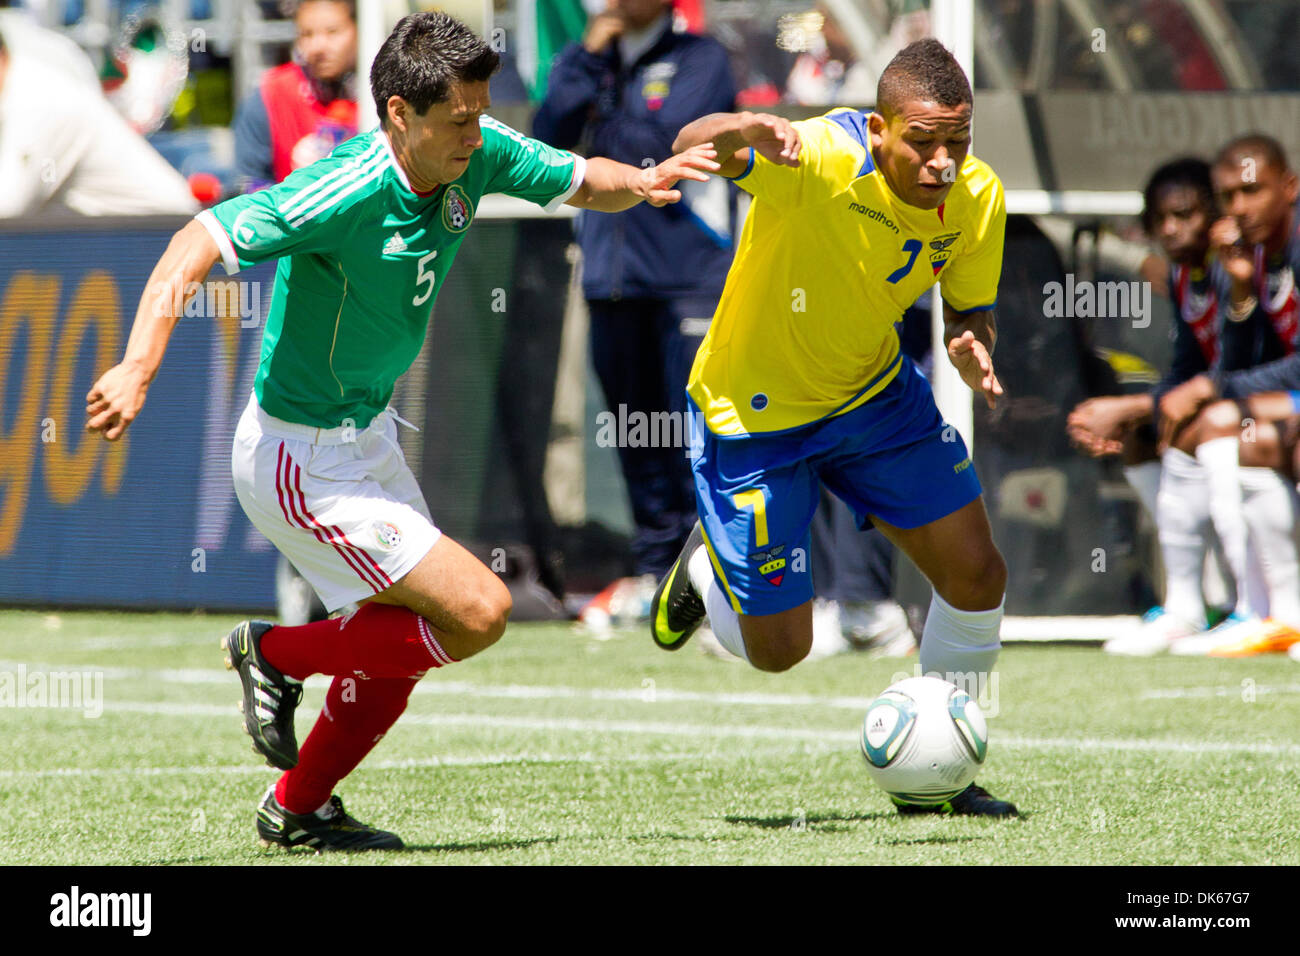 May 28, 2011 - Seattle, Washington, U.S - Mexico defender Ricardo Osorio (5) and Ecuador midfielder Michael Arroyo (7) race for the ball at Qwest Field in Seattle, Washington. The game ended in a 1-1 tie. (Credit Image: © Chris Hunt/Southcreek Global/ZUMApress.com) Stock Photo